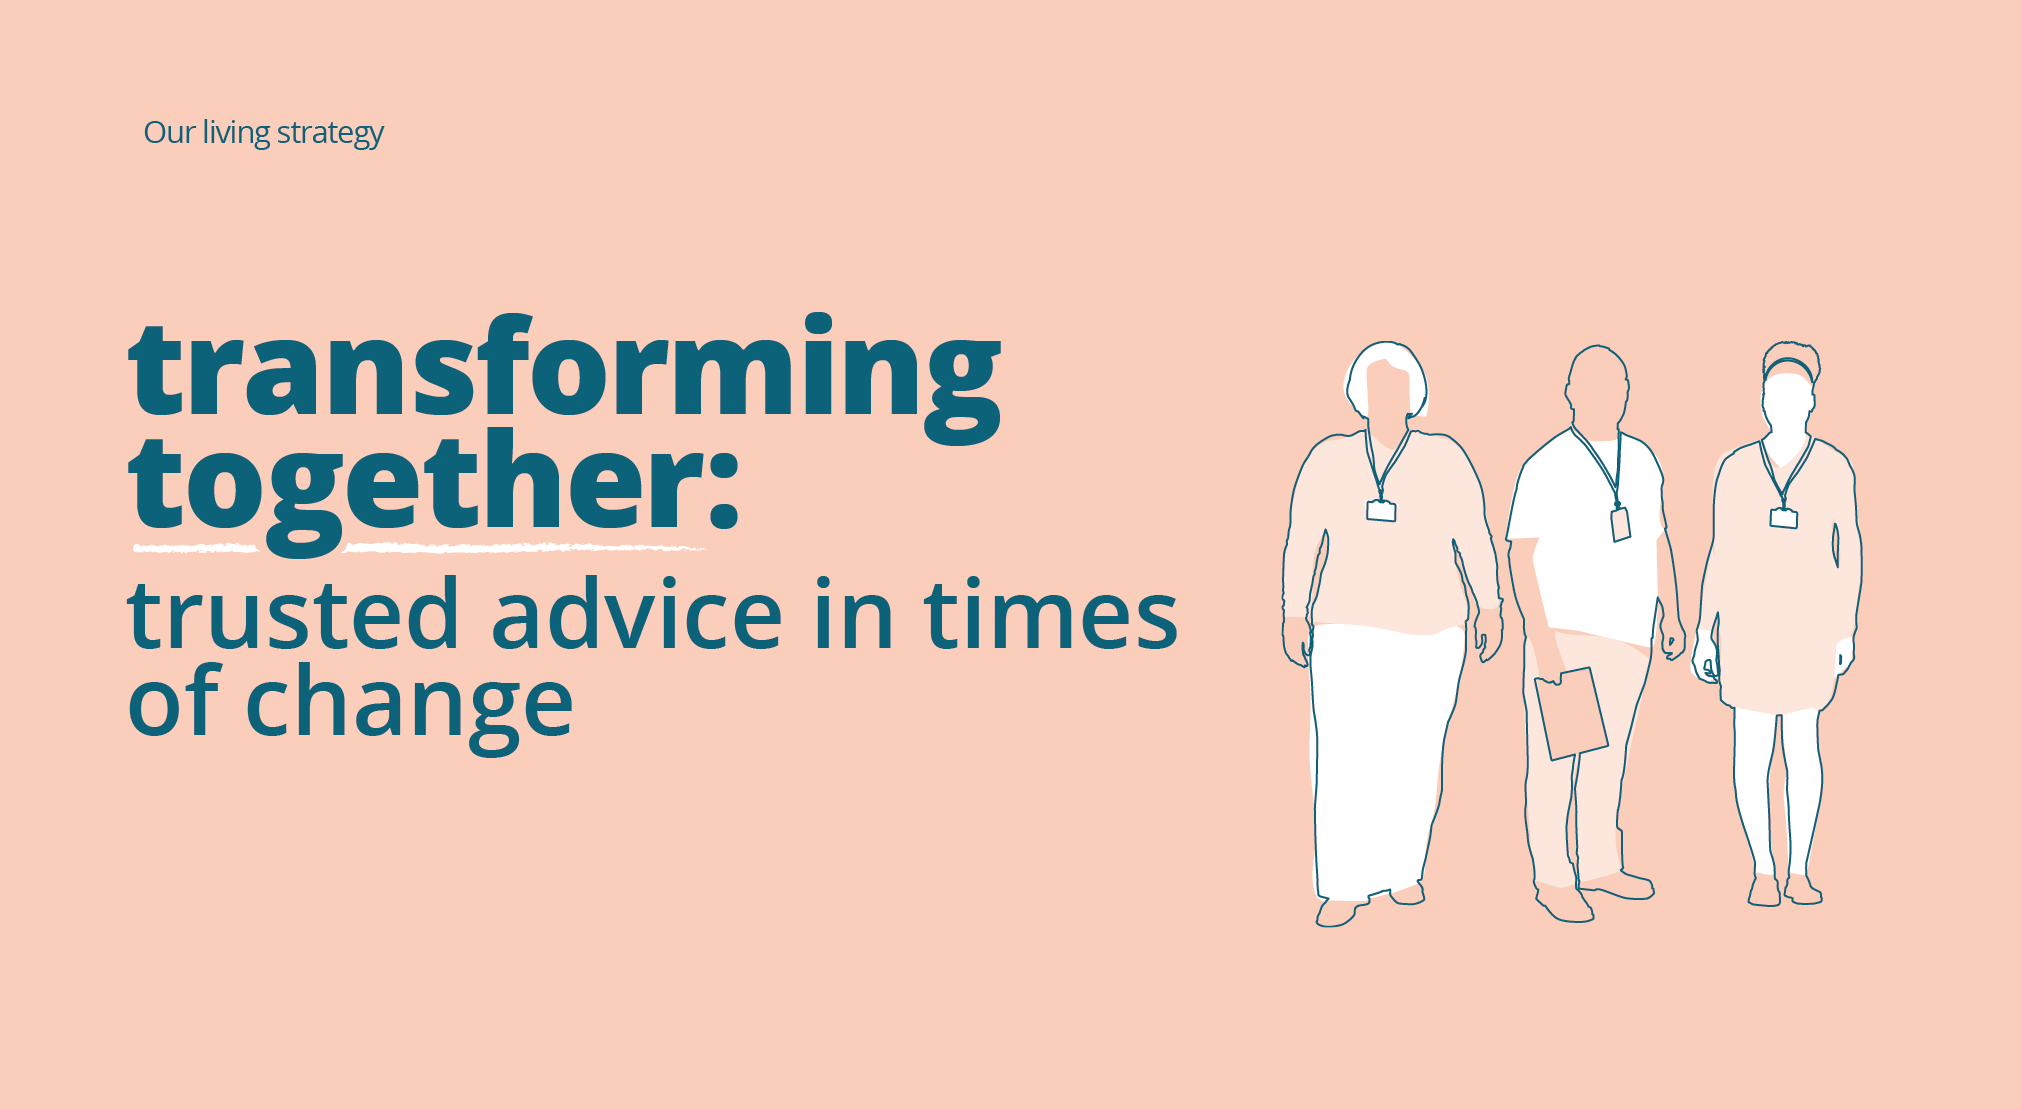 Illustration of 3 silhouettes wearing lanyards. Next to them is the text Our living strategy, transforming together: trusted advice in times of change